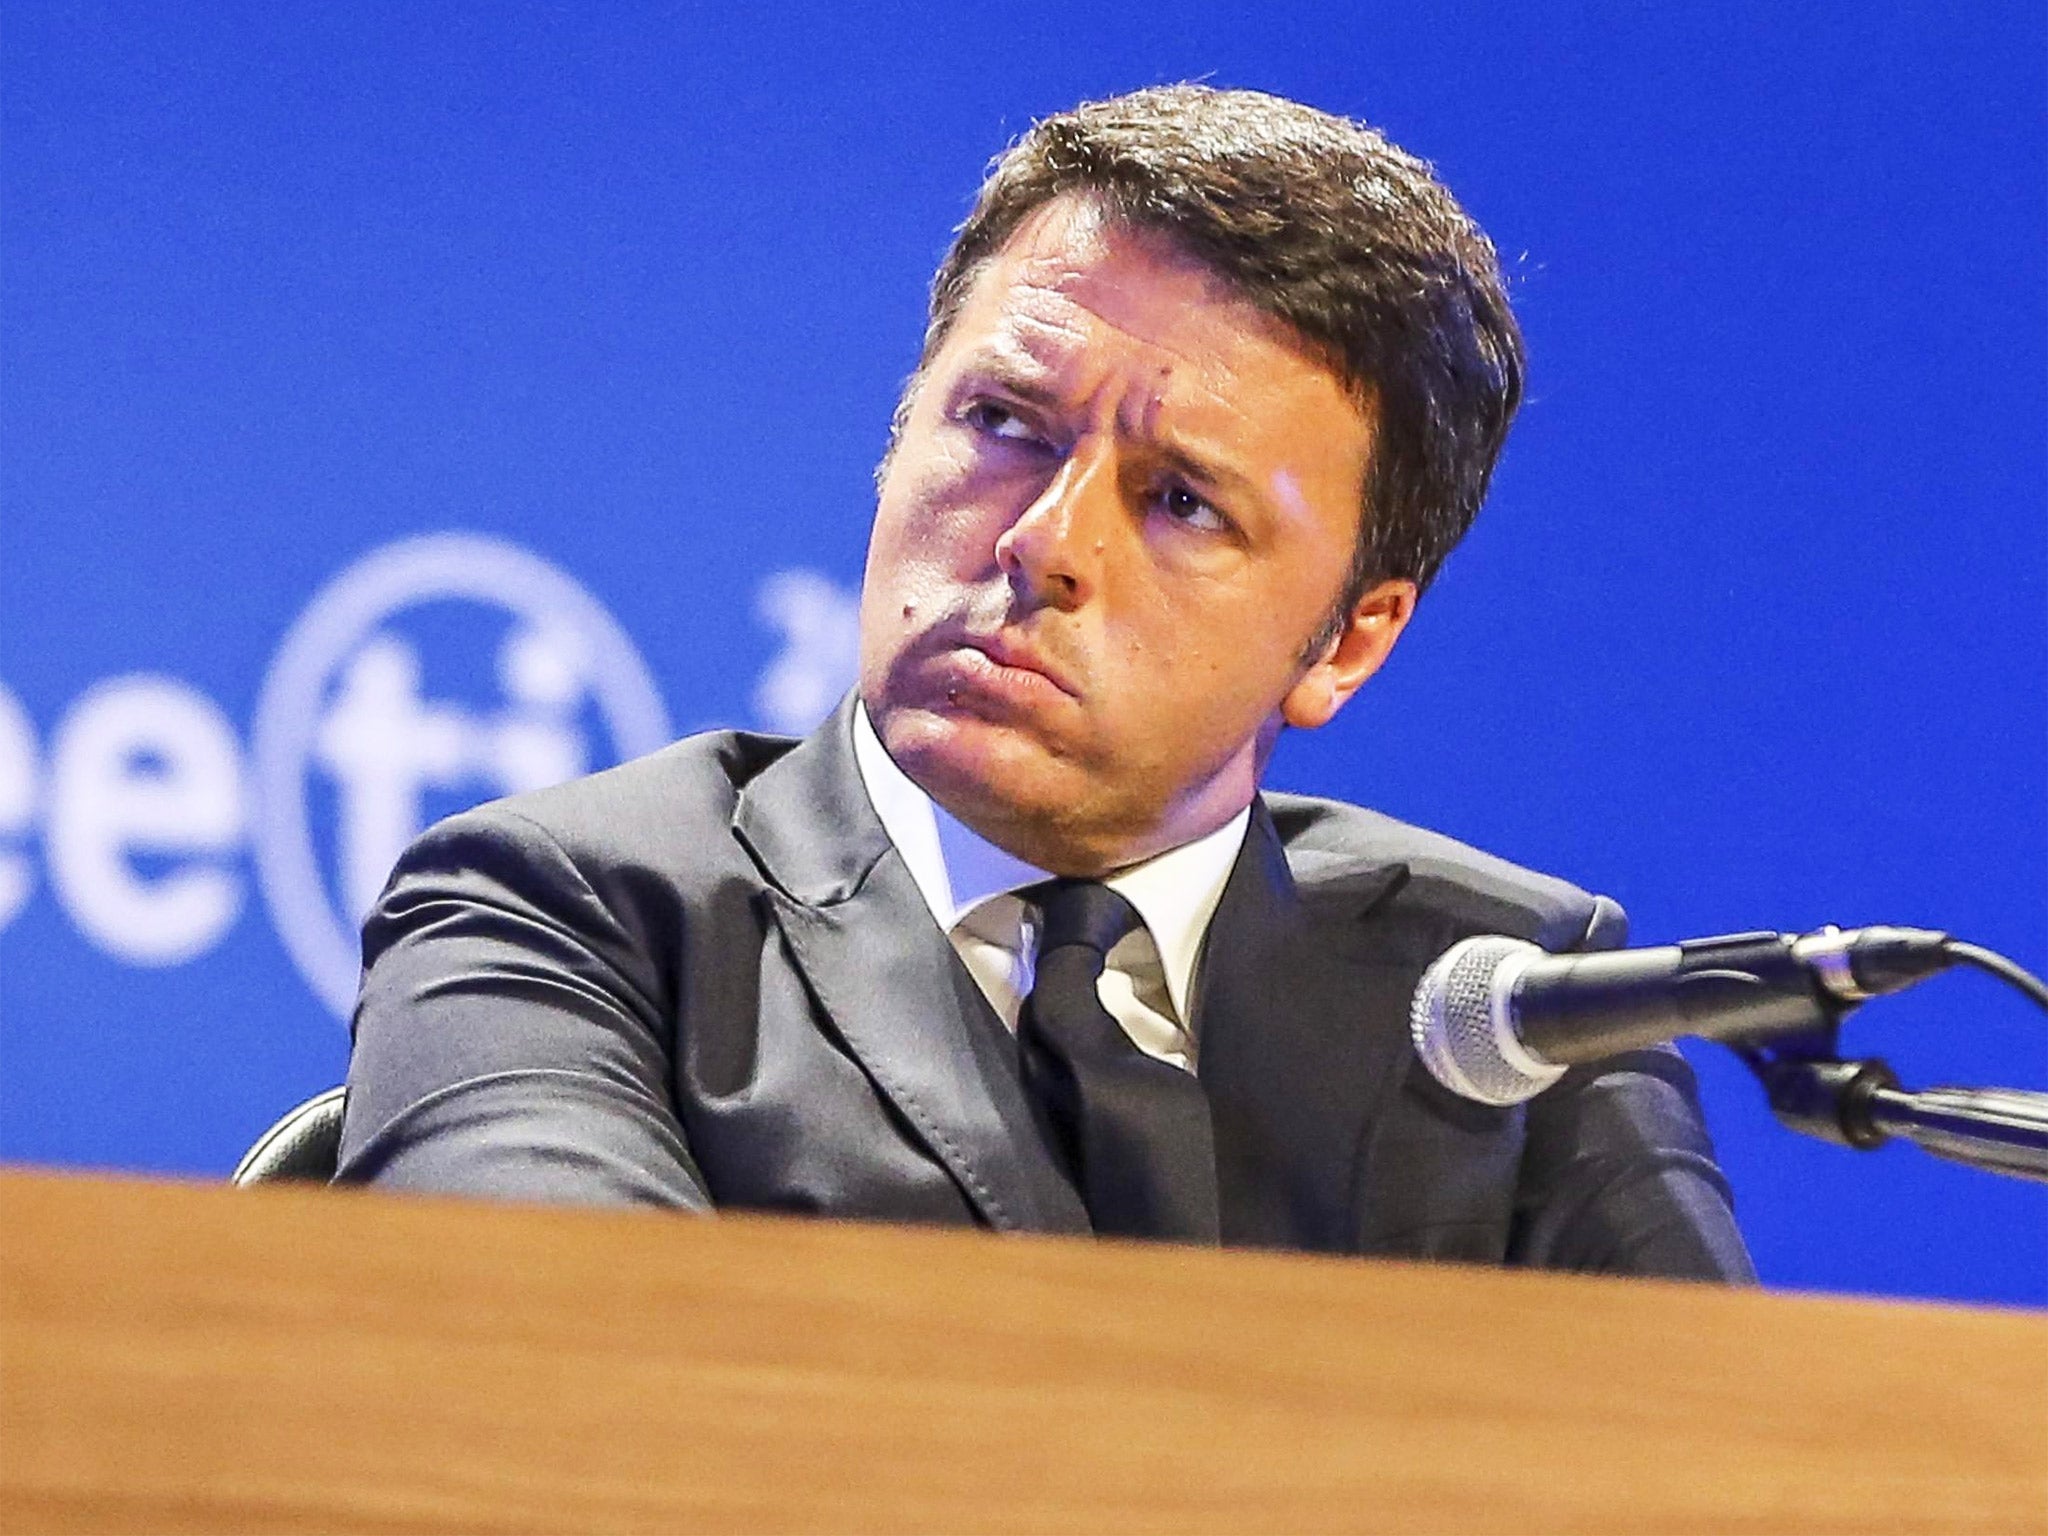 Italian Premier Matteo Renzi in Rimini has called a meeting following the result of the vote